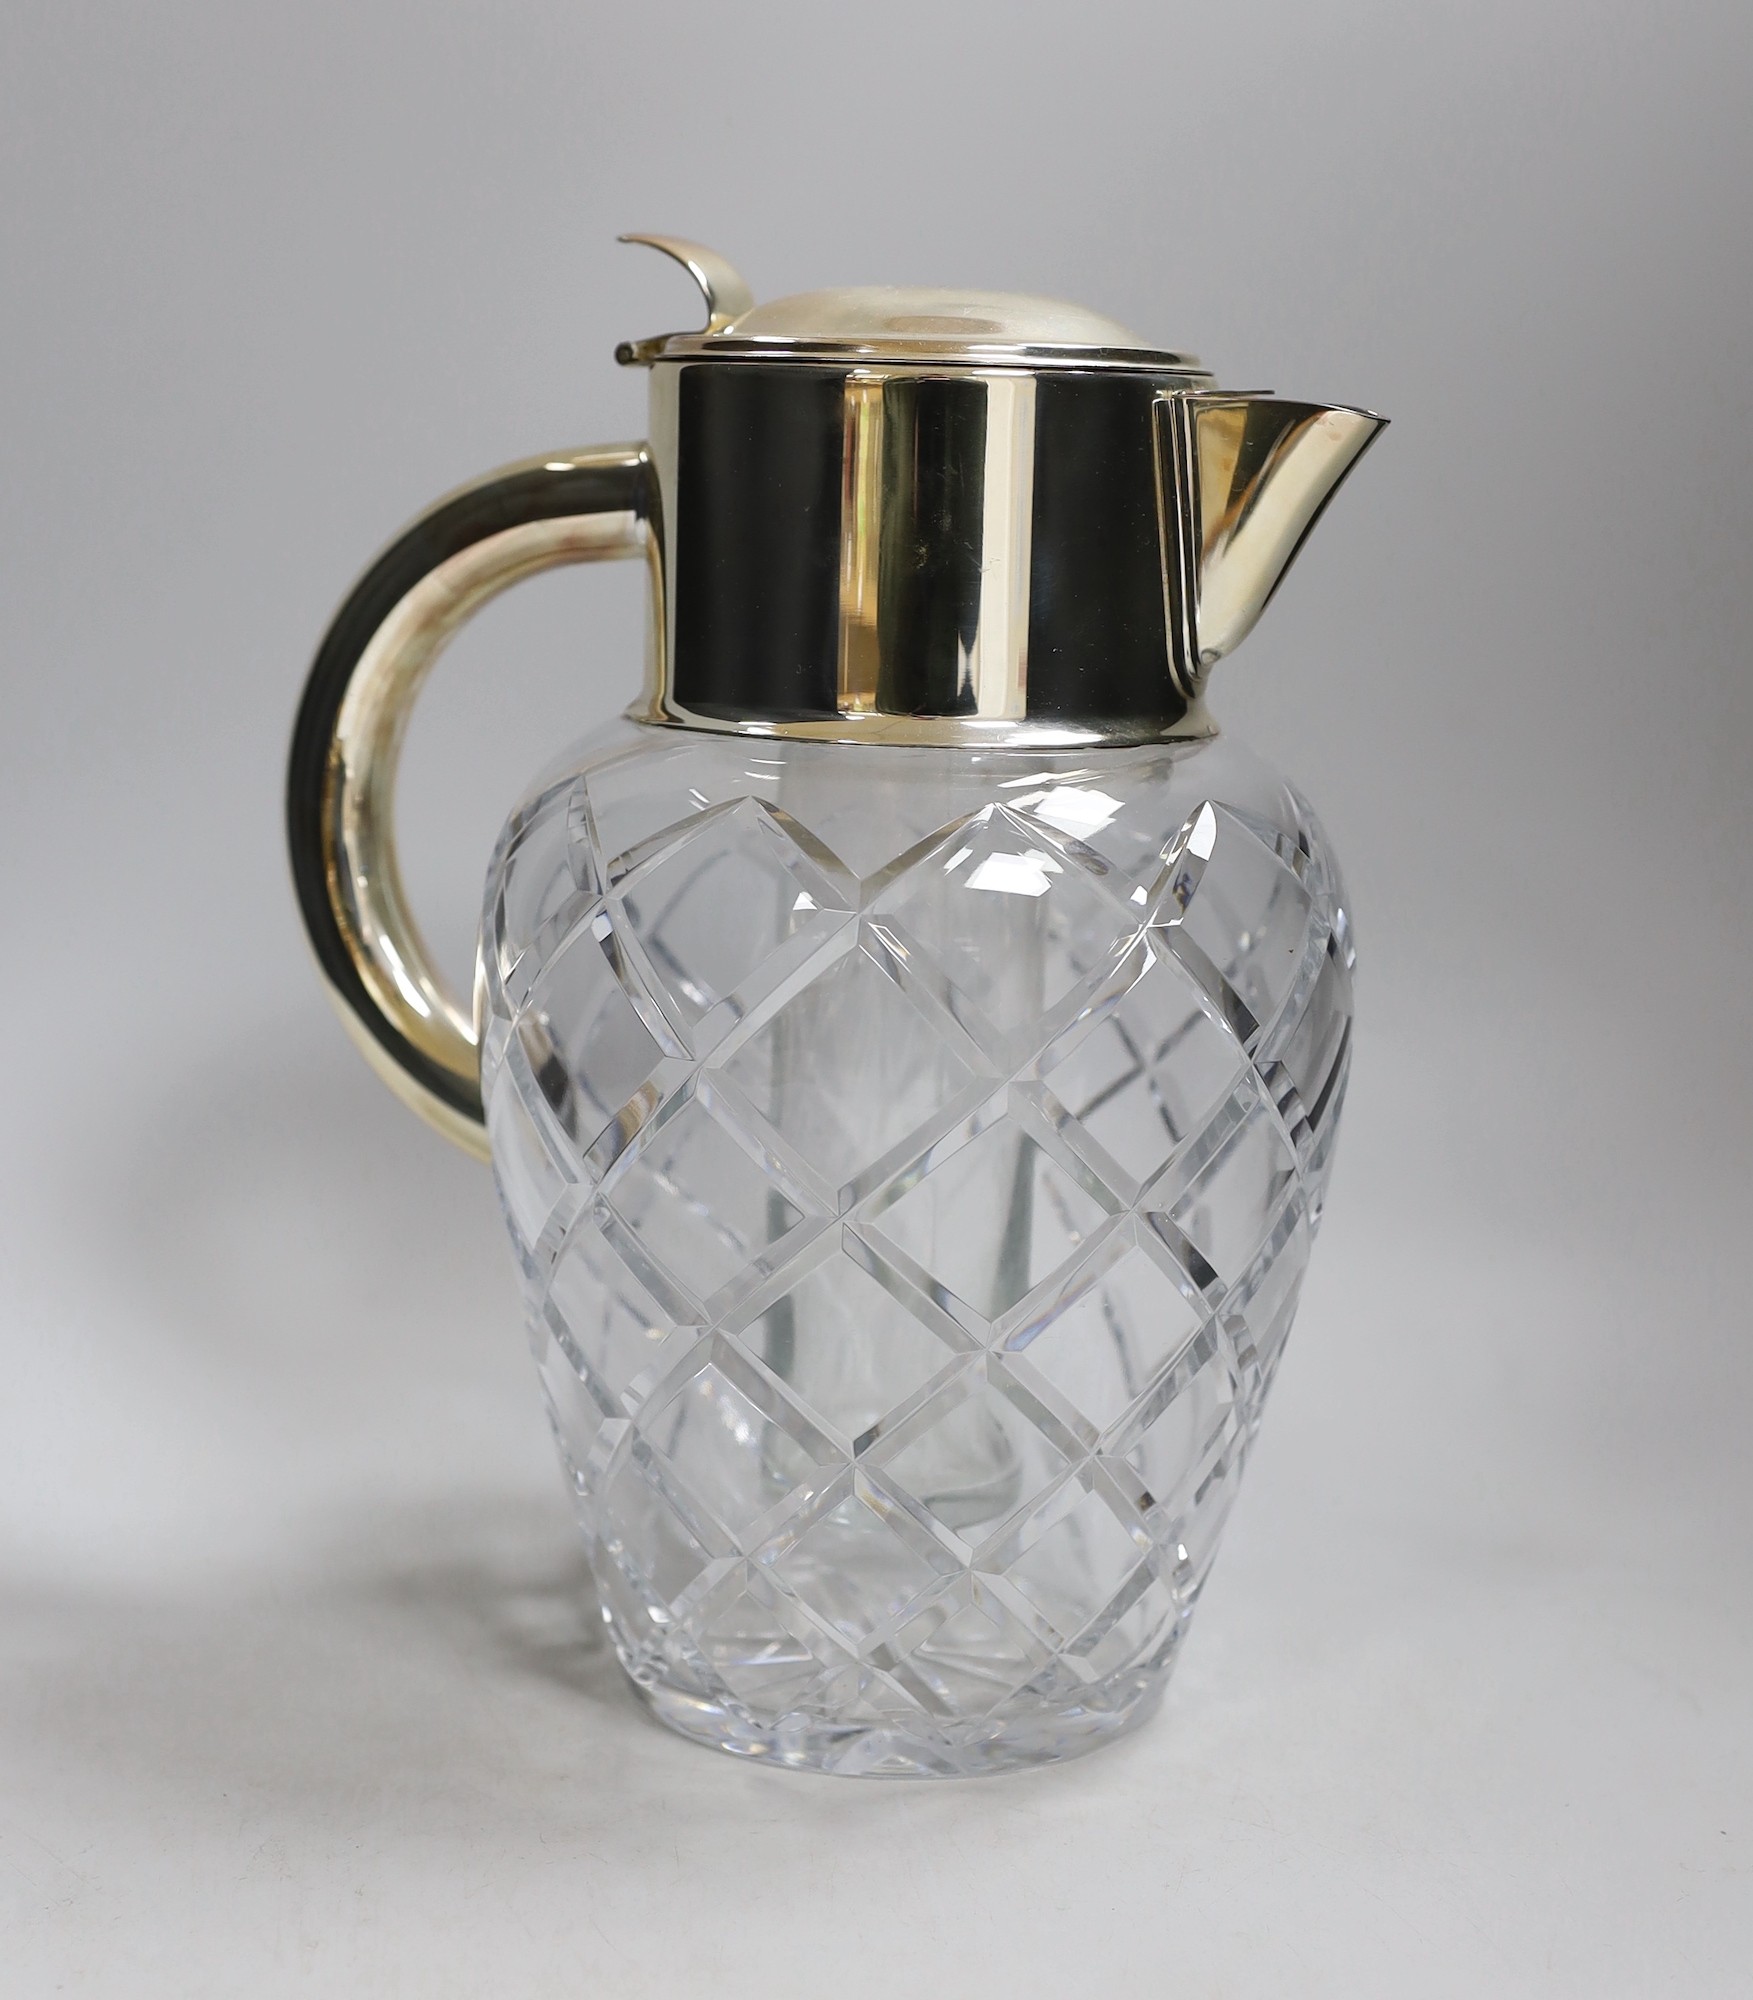 A large cut glass and silver plated jug, possibly for Pimms. 28cm tall